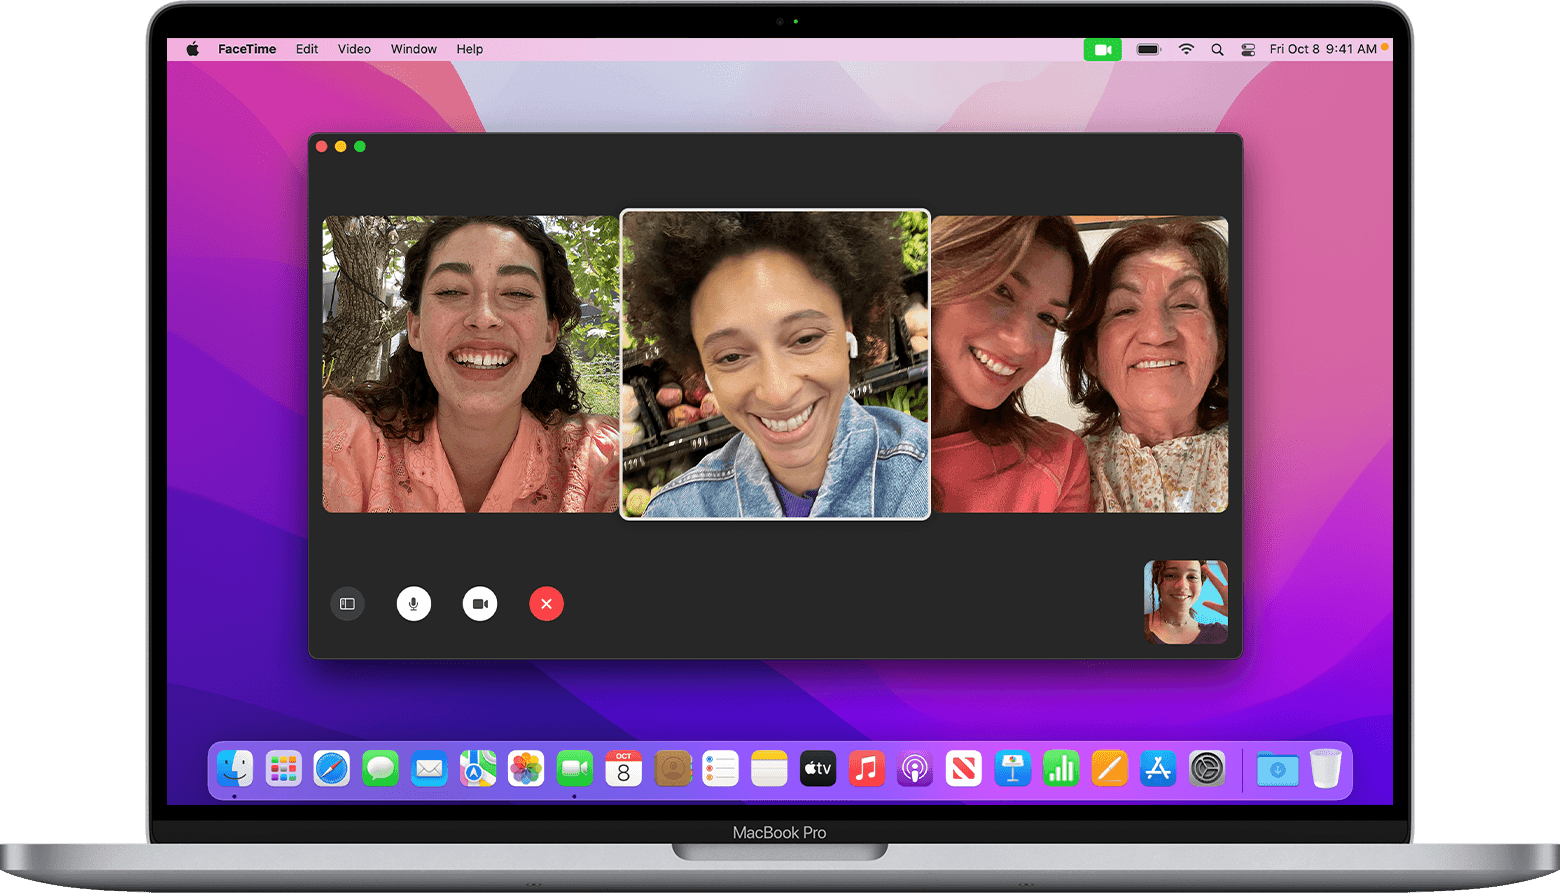 how to facetime on mac